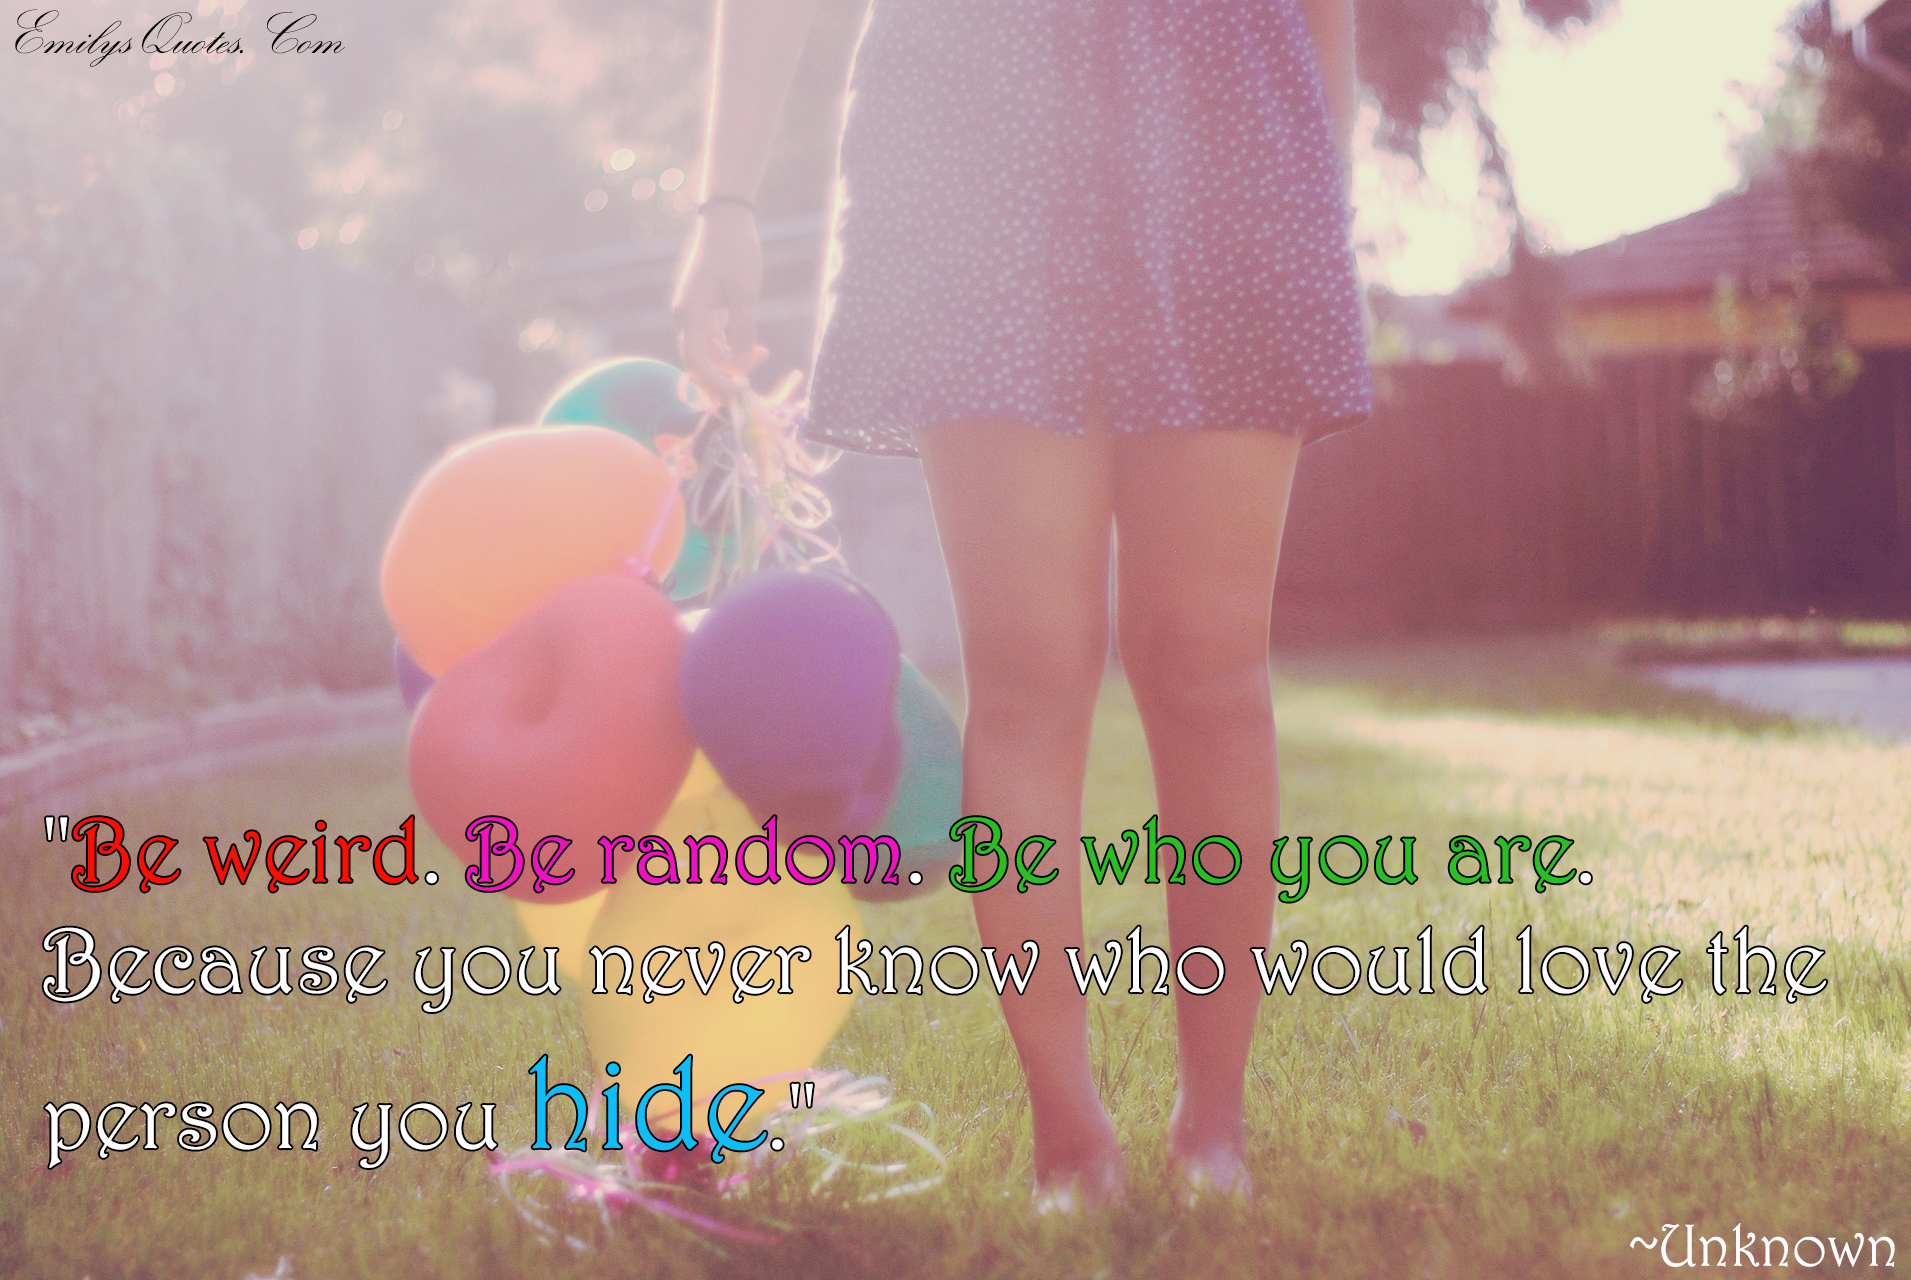 Be weird. Be random. Be who you are. Because you never know who would love the person you hide.